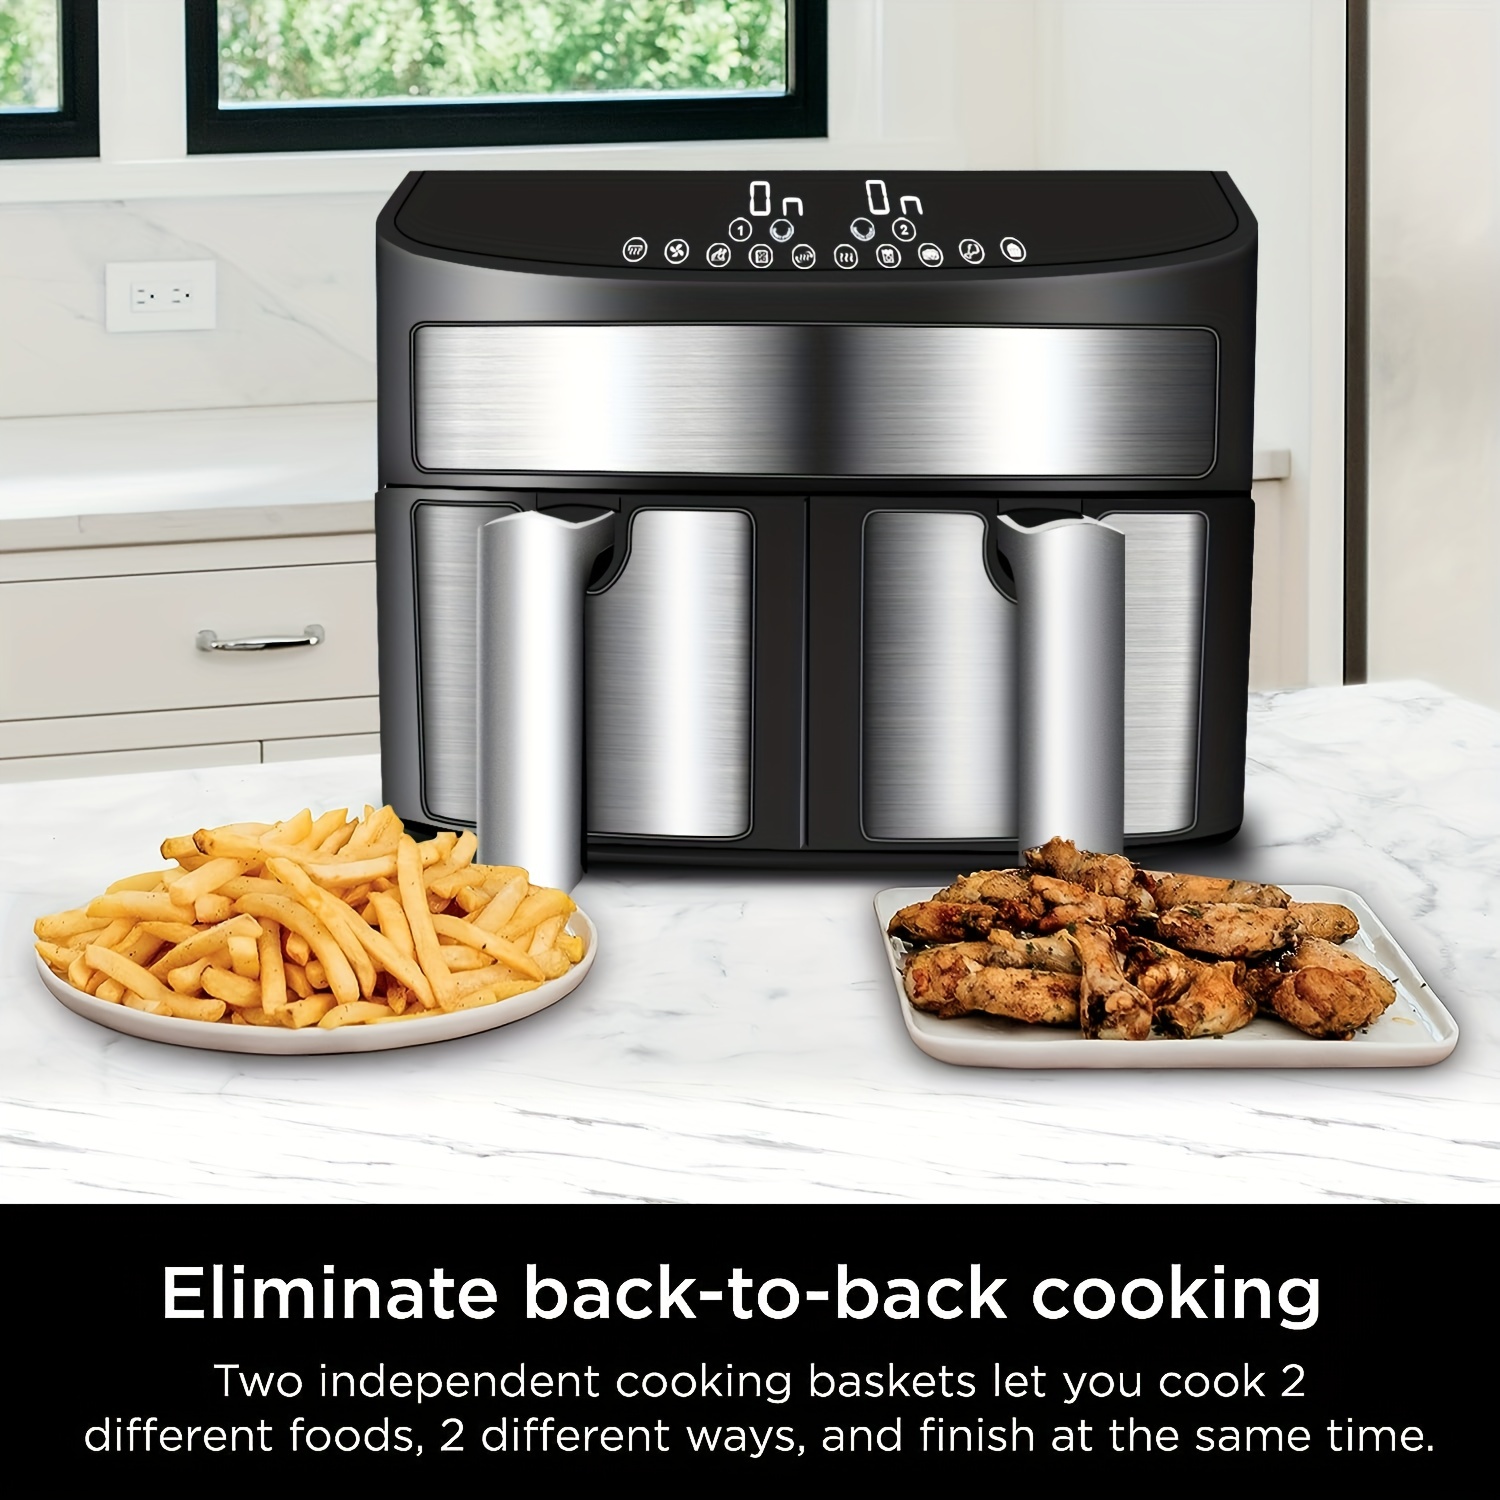 8 Quart 6-in-1 Dualspace Air Fryer With 2 Independent Frying